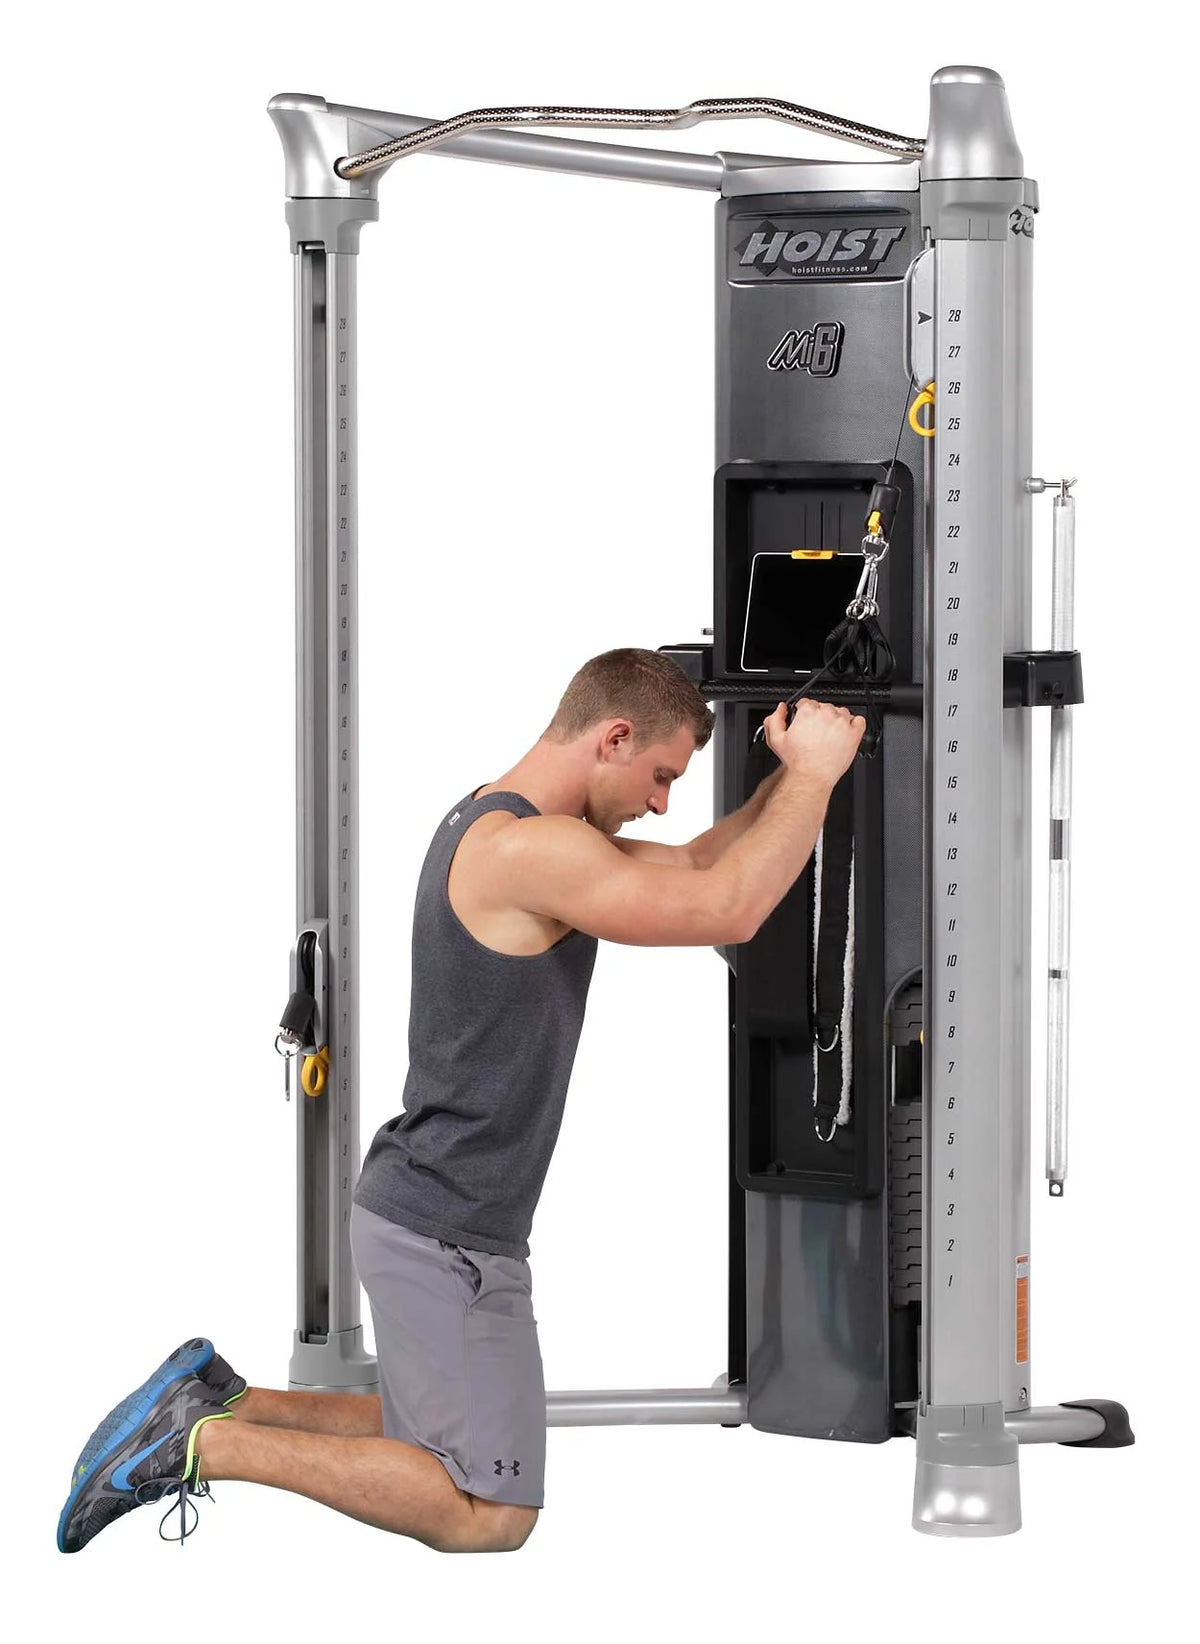 Hoist Fitness Mi6 Functional Trainer System view in use | Fitness Experience